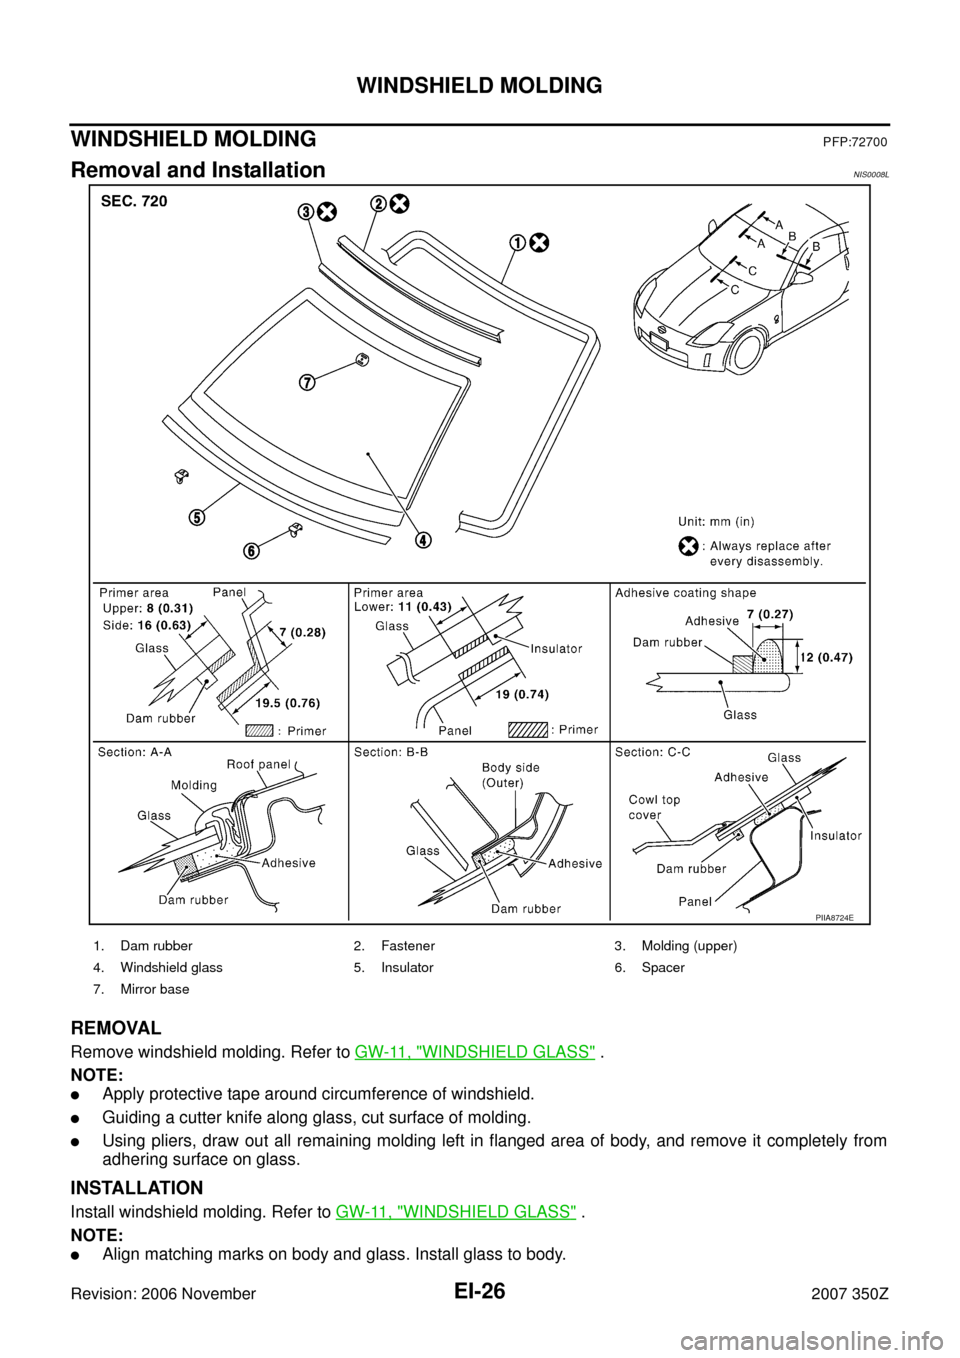 NISSAN 350Z 2007 Z33 Exterior And Interior Owners Manual EI-26
WINDSHIELD MOLDING
Revision: 2006 November2007 350Z
WINDSHIELD MOLDINGPFP:72700
Removal and InstallationNIS0008L
REMOVAL
Remove windshield molding. Refer to GW-11, "WINDSHIELD GLASS" .
NOTE:
Ap